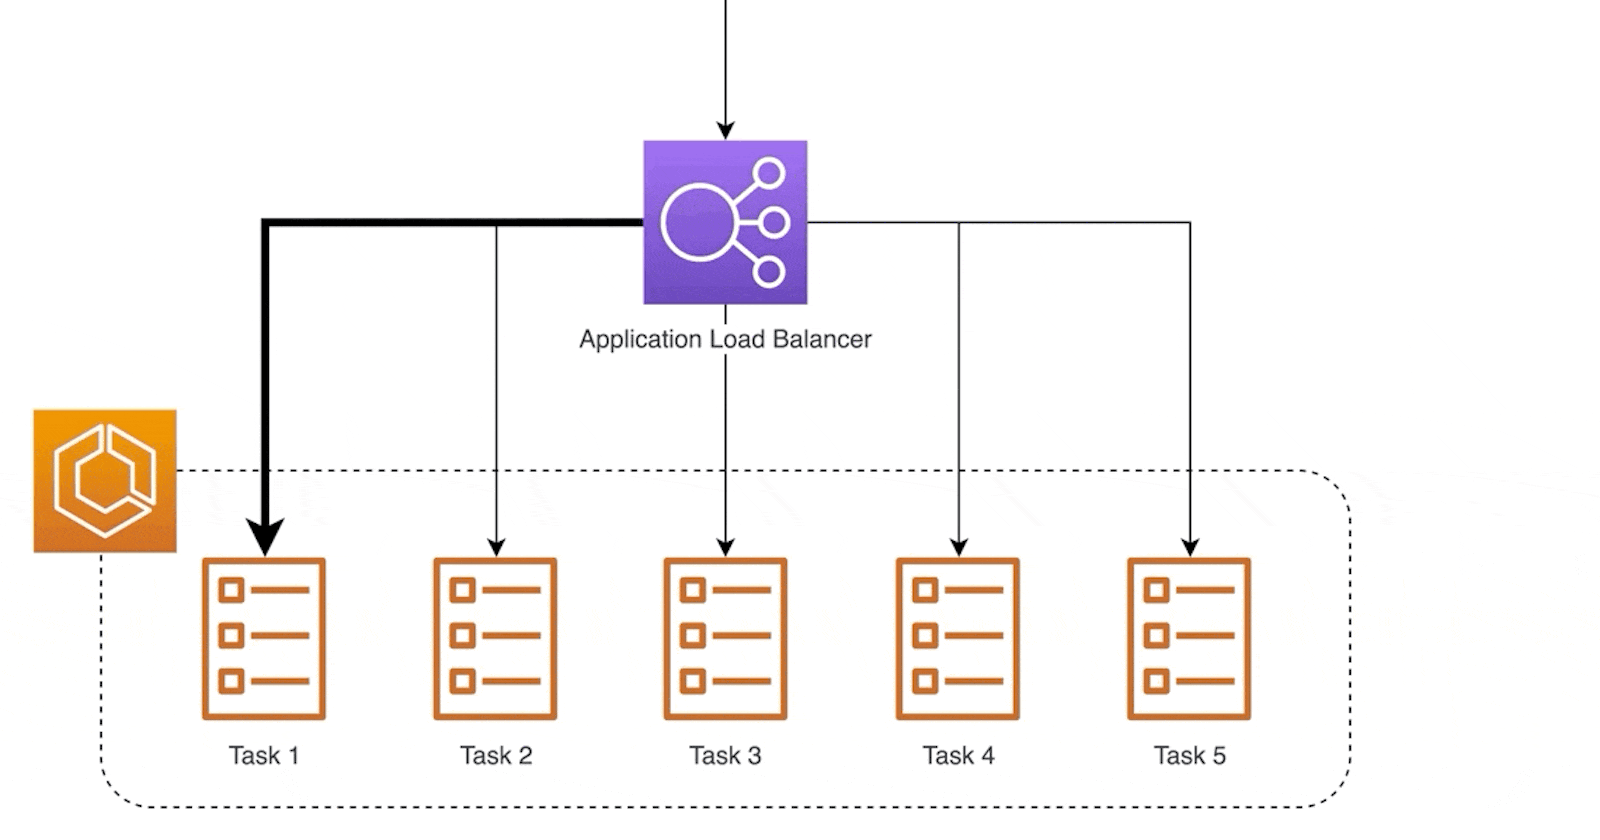 Day 41 - Application Load Balancer with AWS EC2